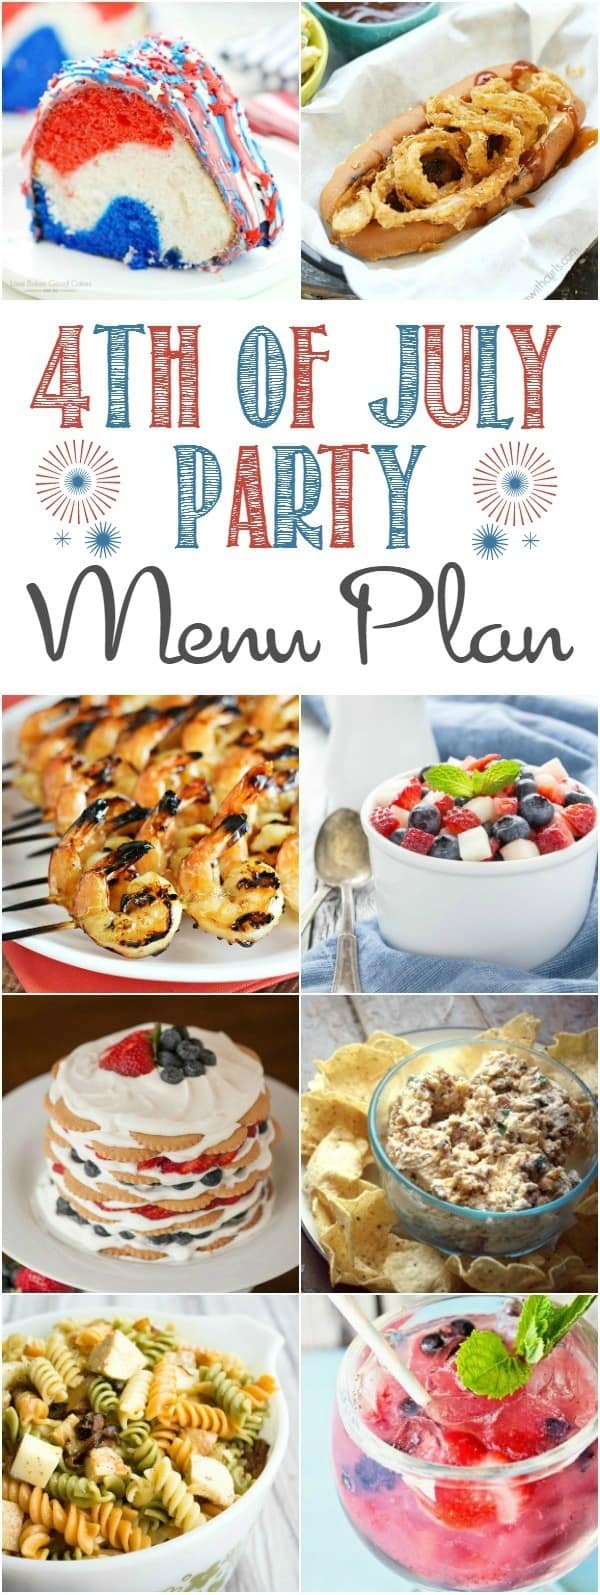 Show your patriotic pride and delight your guests with delicious recipes in this 4th of July Party Menu Plan | cookingwithcurls.com